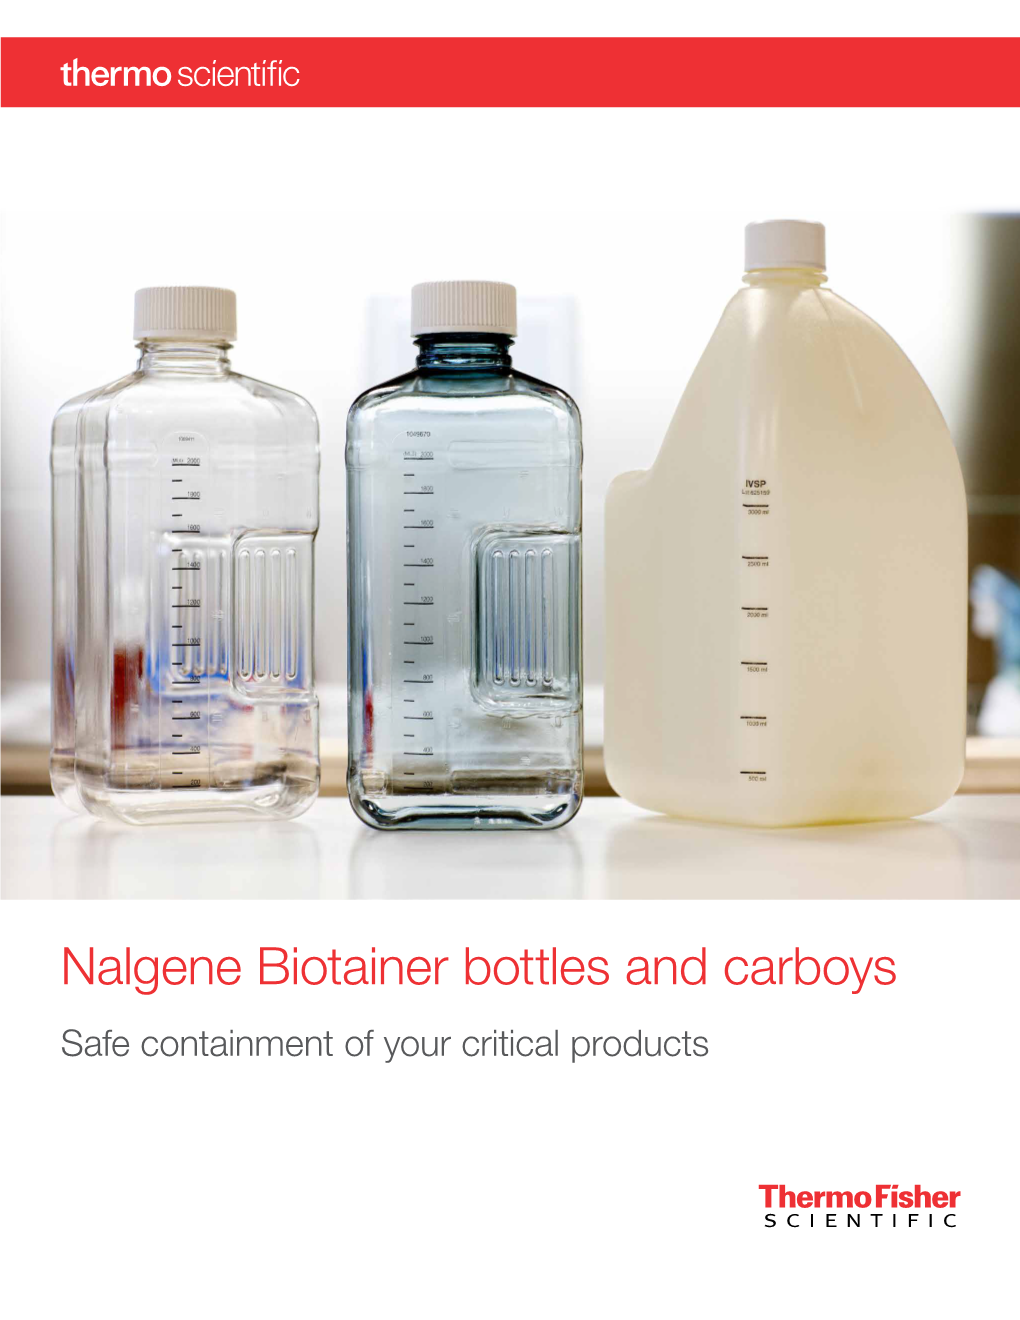 Nalgene Biotainer Bottles and Carboys Safe Containment of Your Critical Products